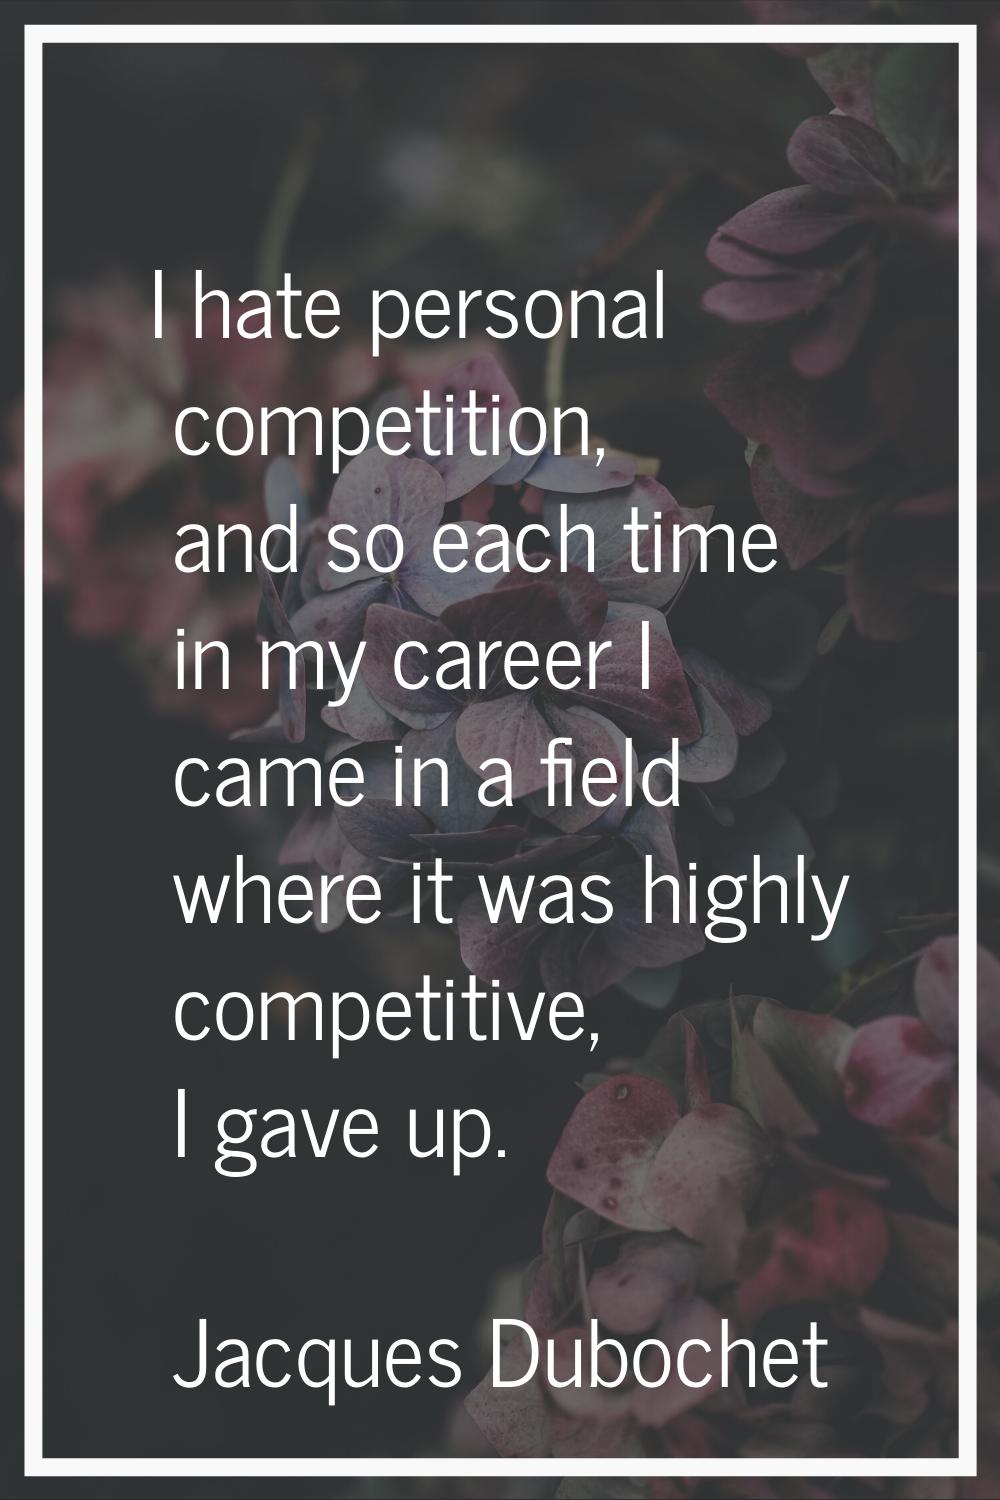 I hate personal competition, and so each time in my career I came in a field where it was highly co